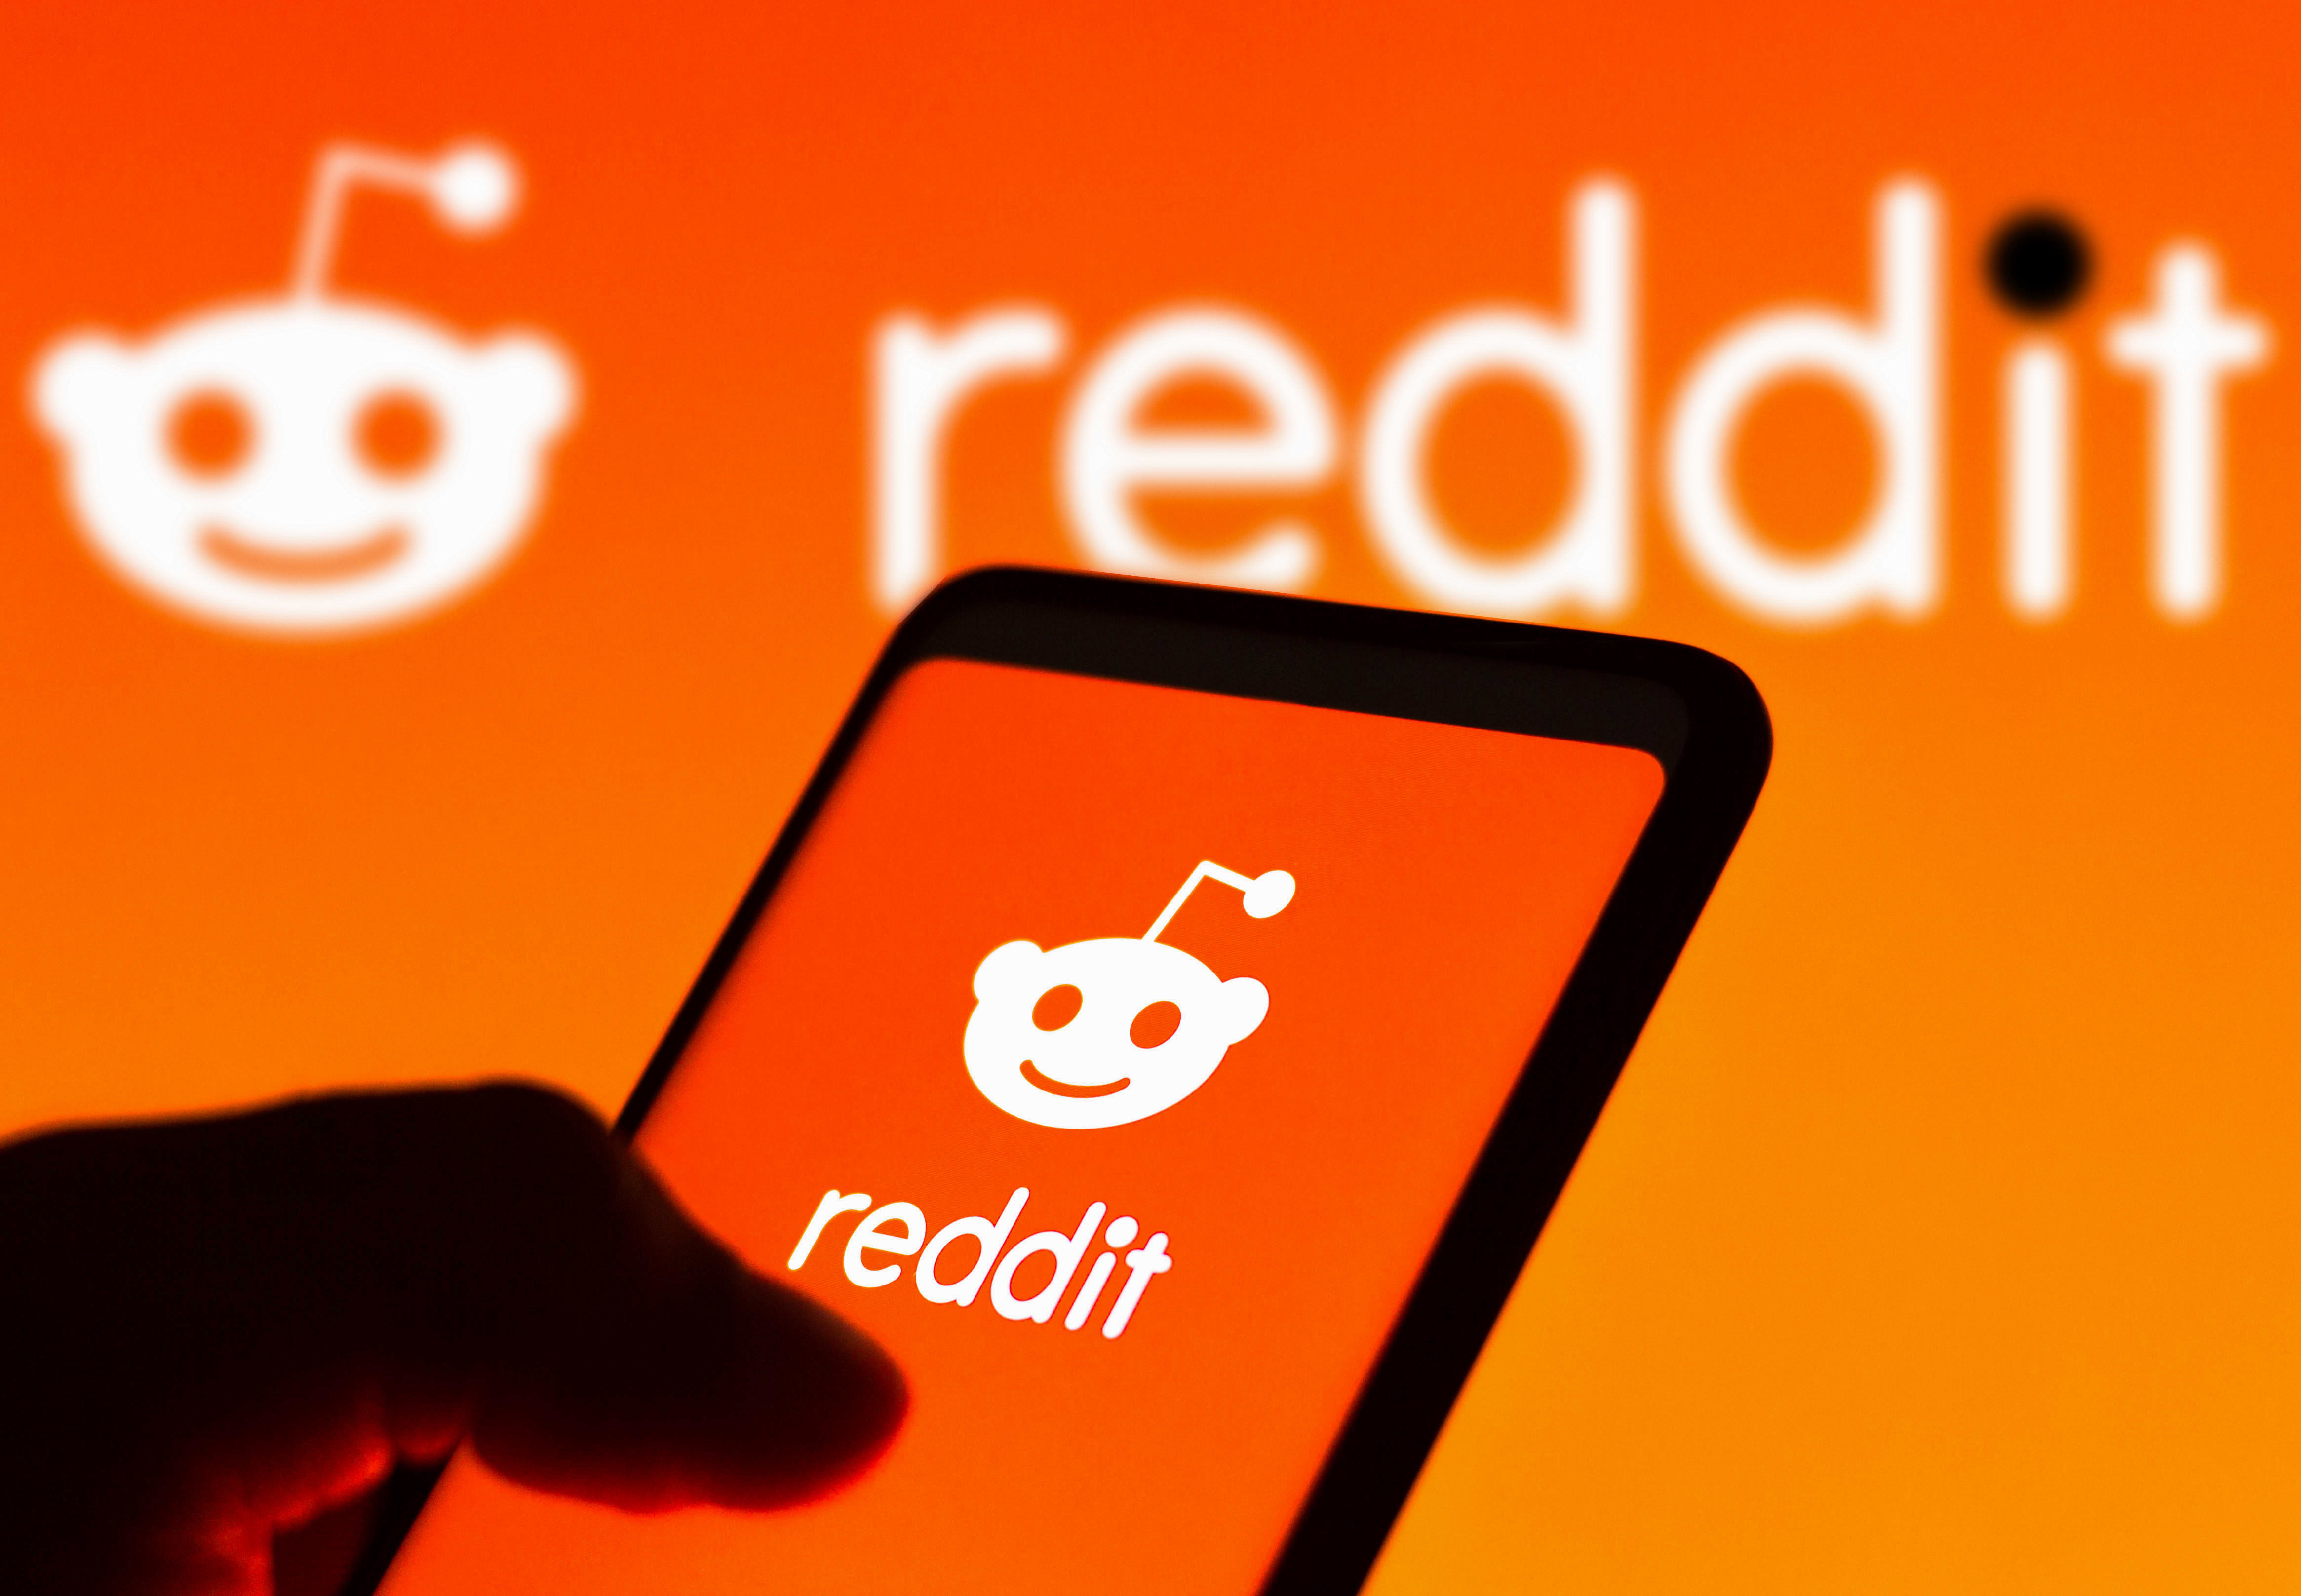 Reddit may accept Bitcoin, strippers approve